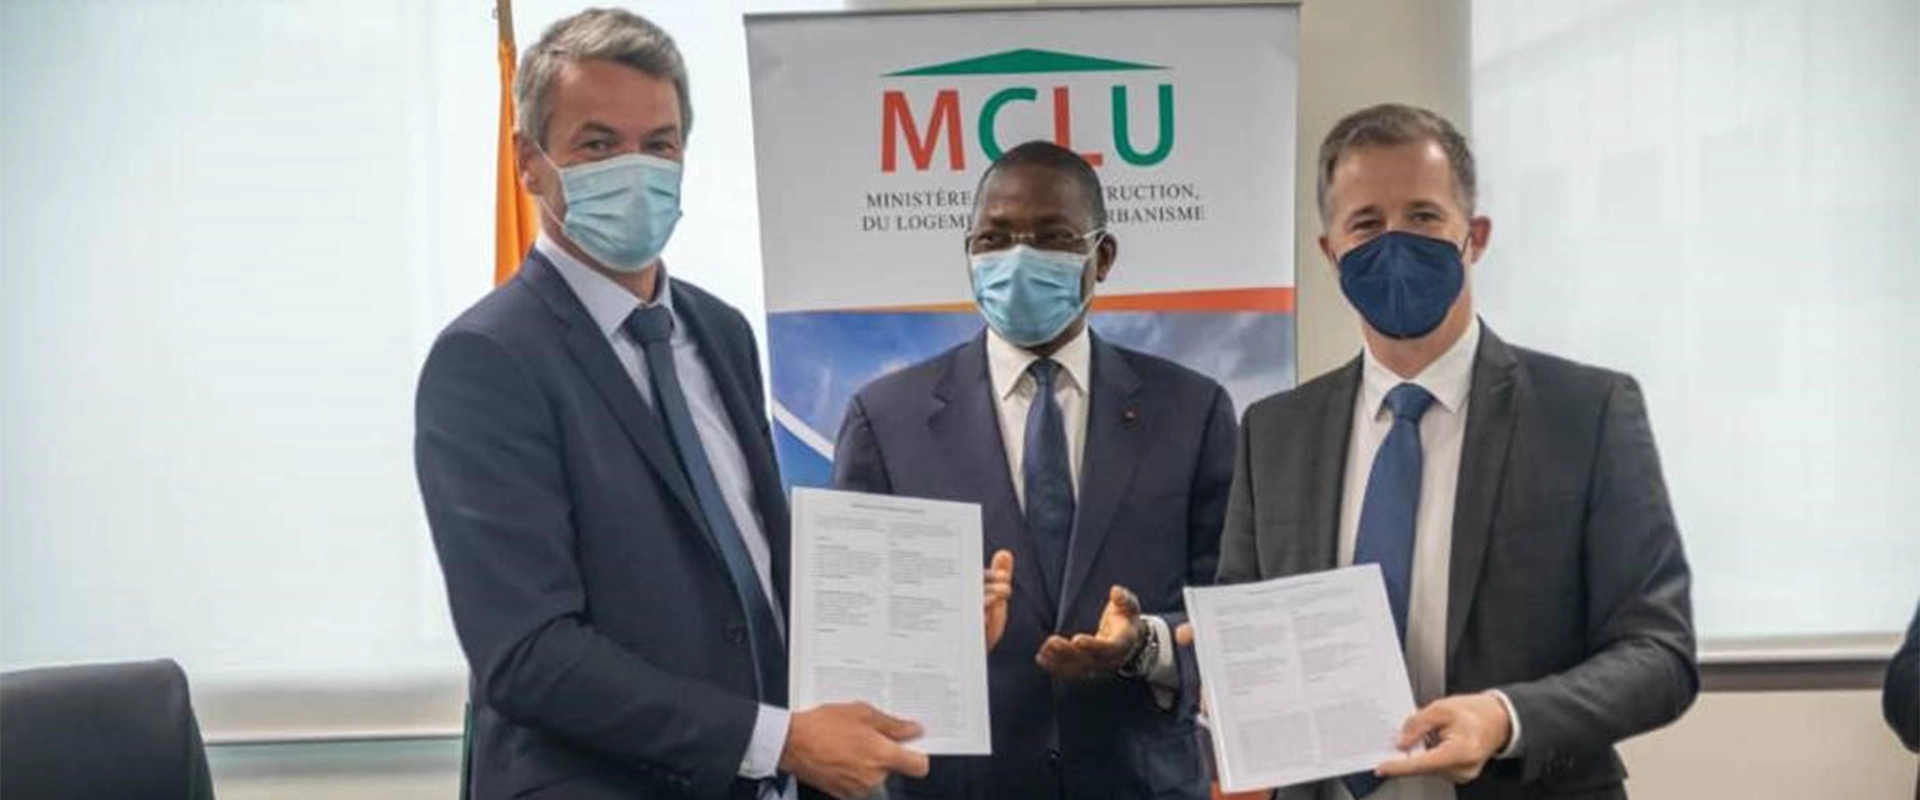 M. Antoine Grolin, Bruno Nabagné Koné and Marco Romahn holding the signed contract for an urbanization project at Côte d’Ivoire